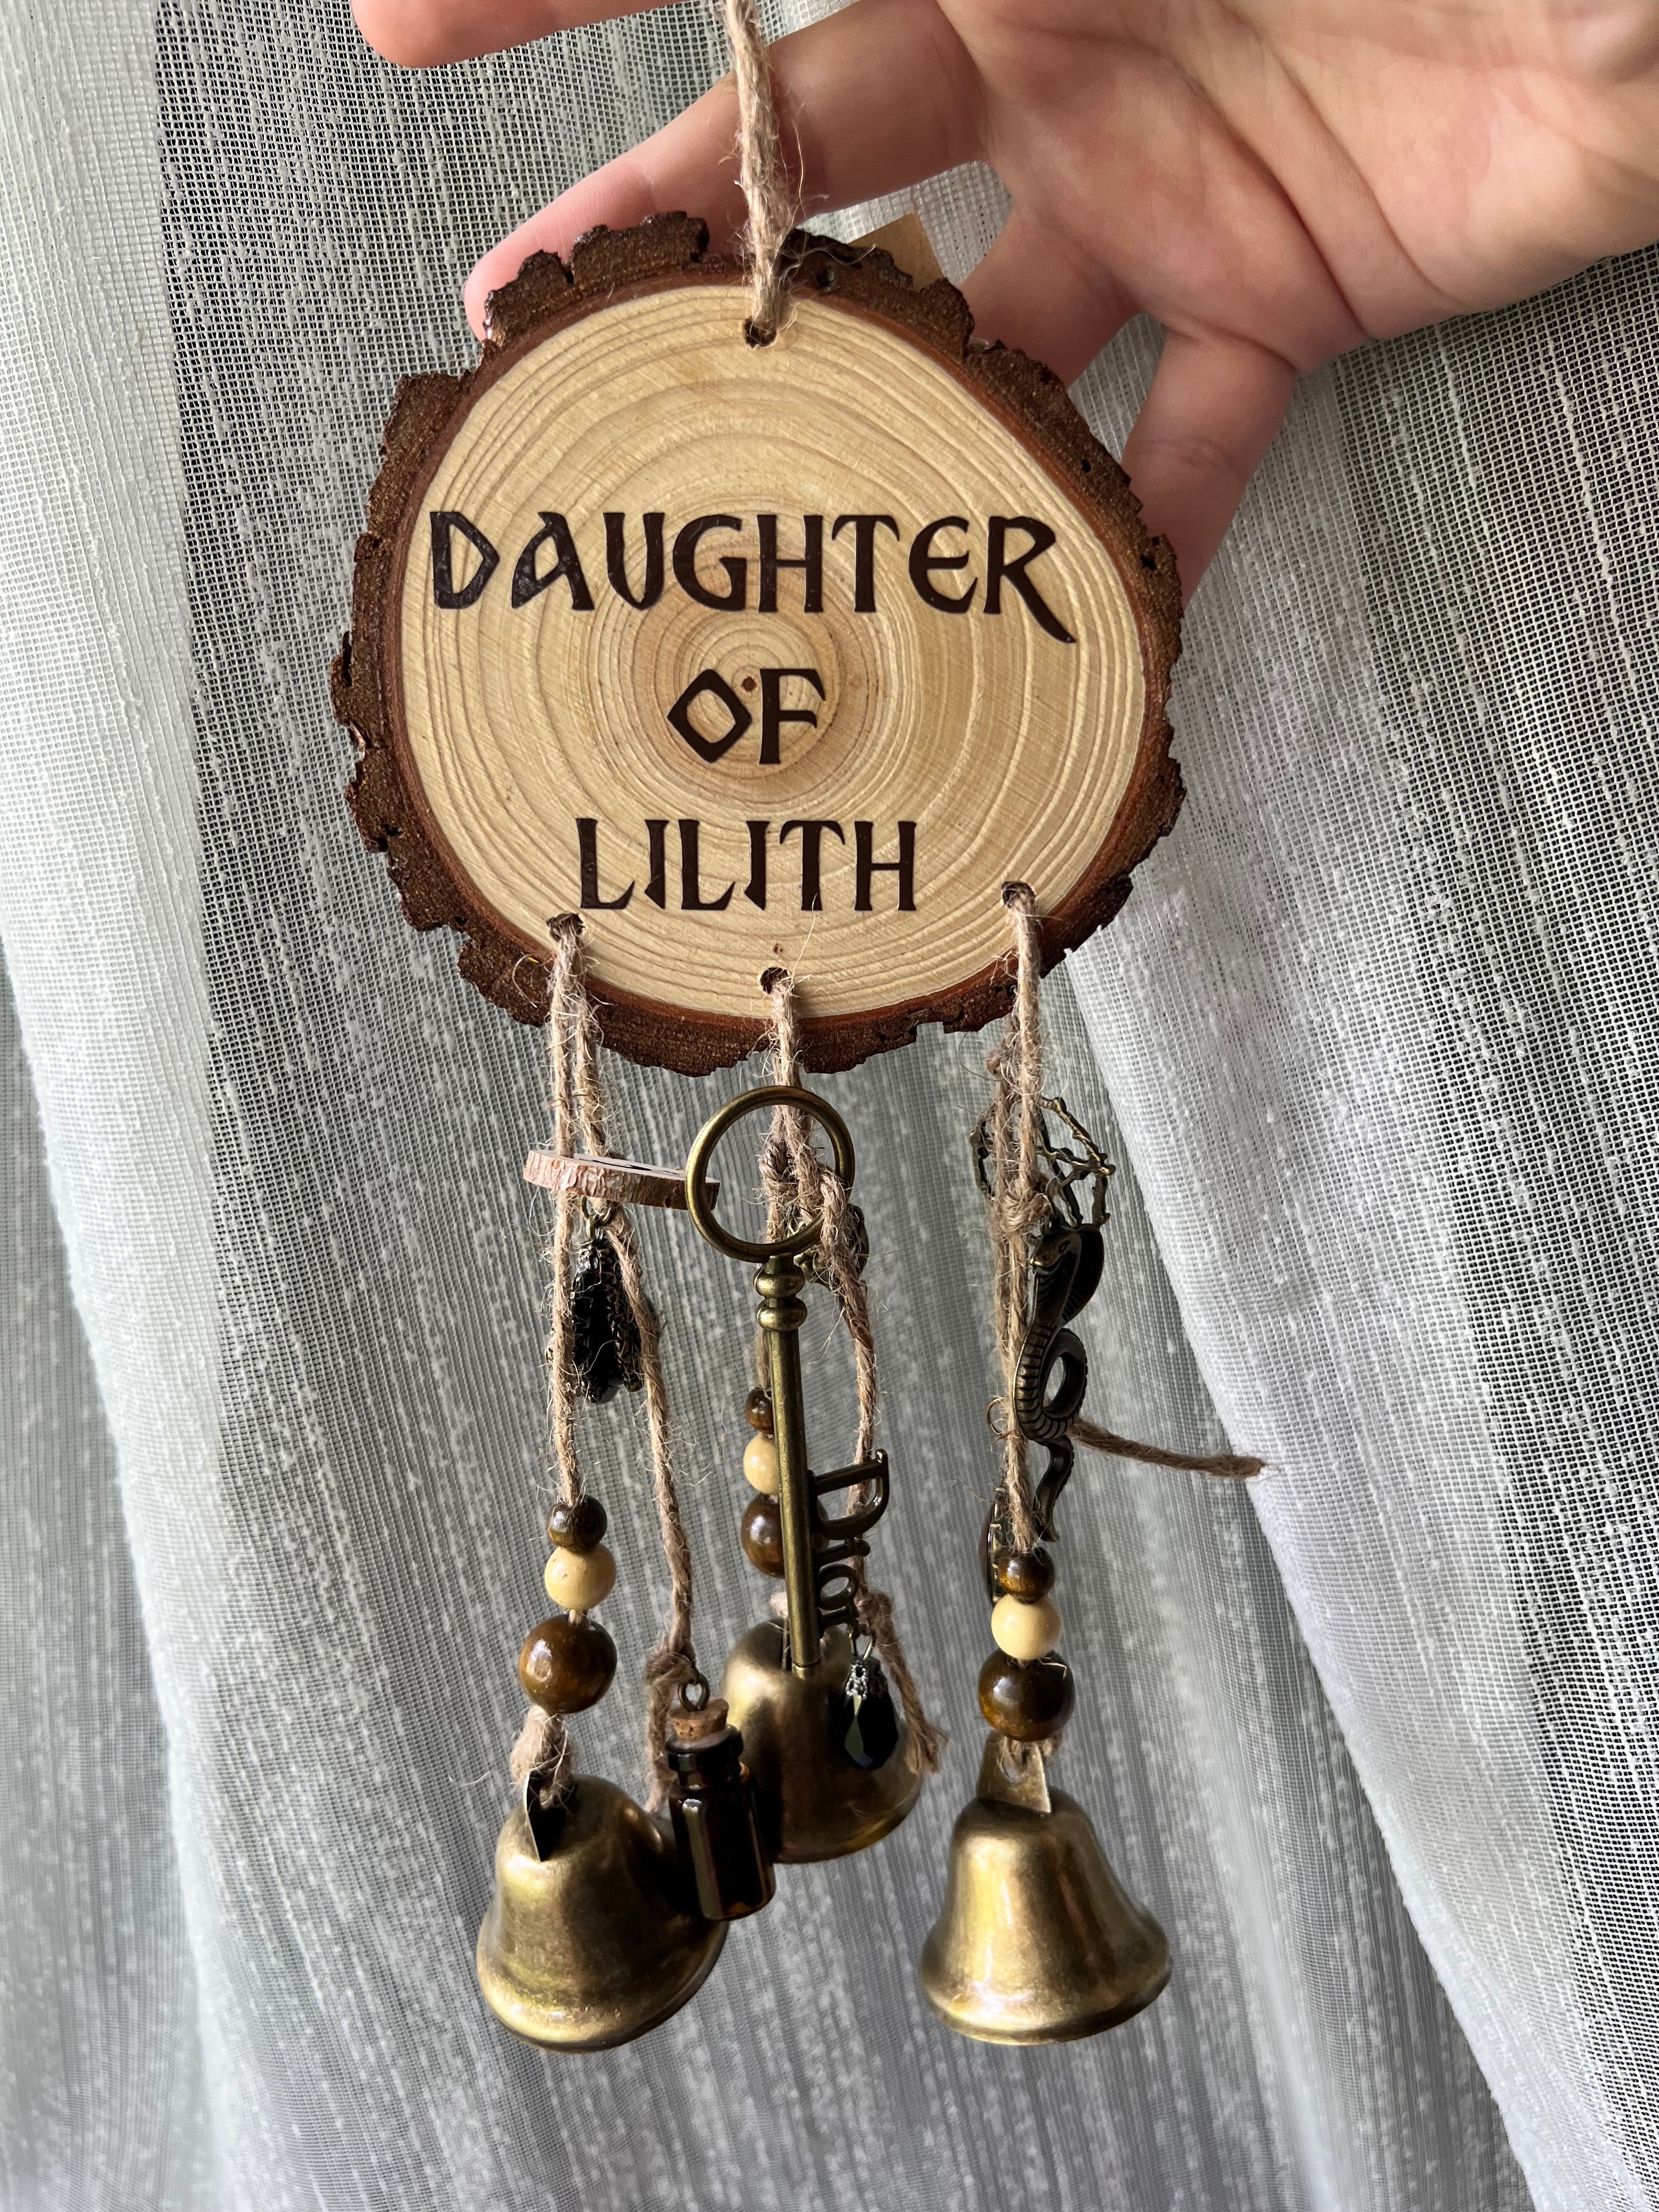 Handmade Witches Bells- Daughter of Lilith